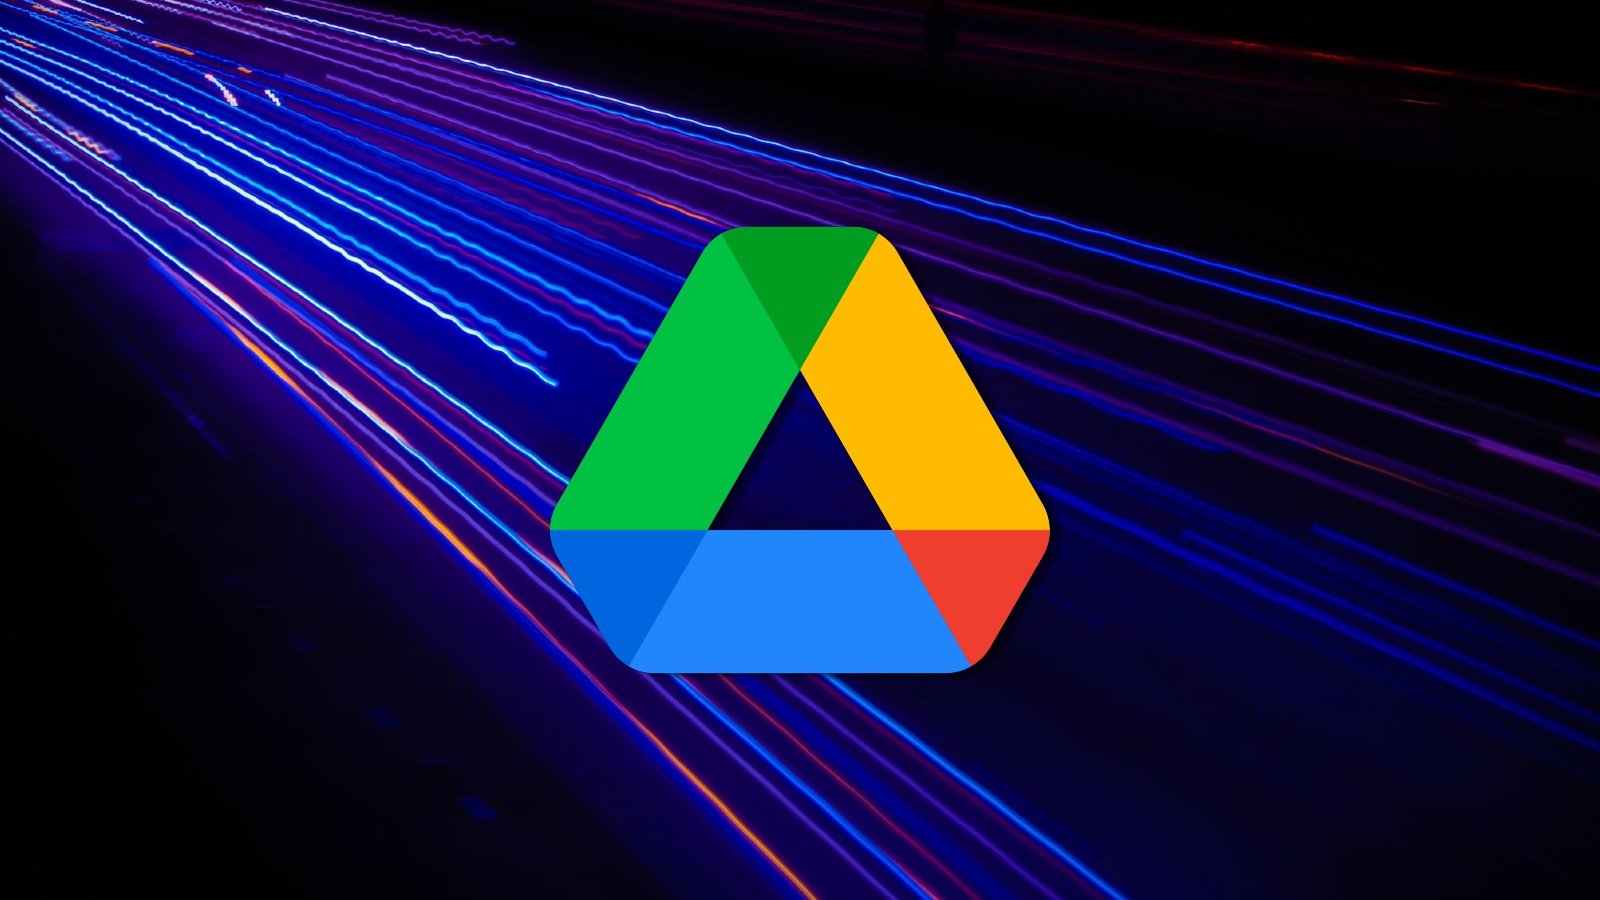 Google Drive users angry over losing months of stored data